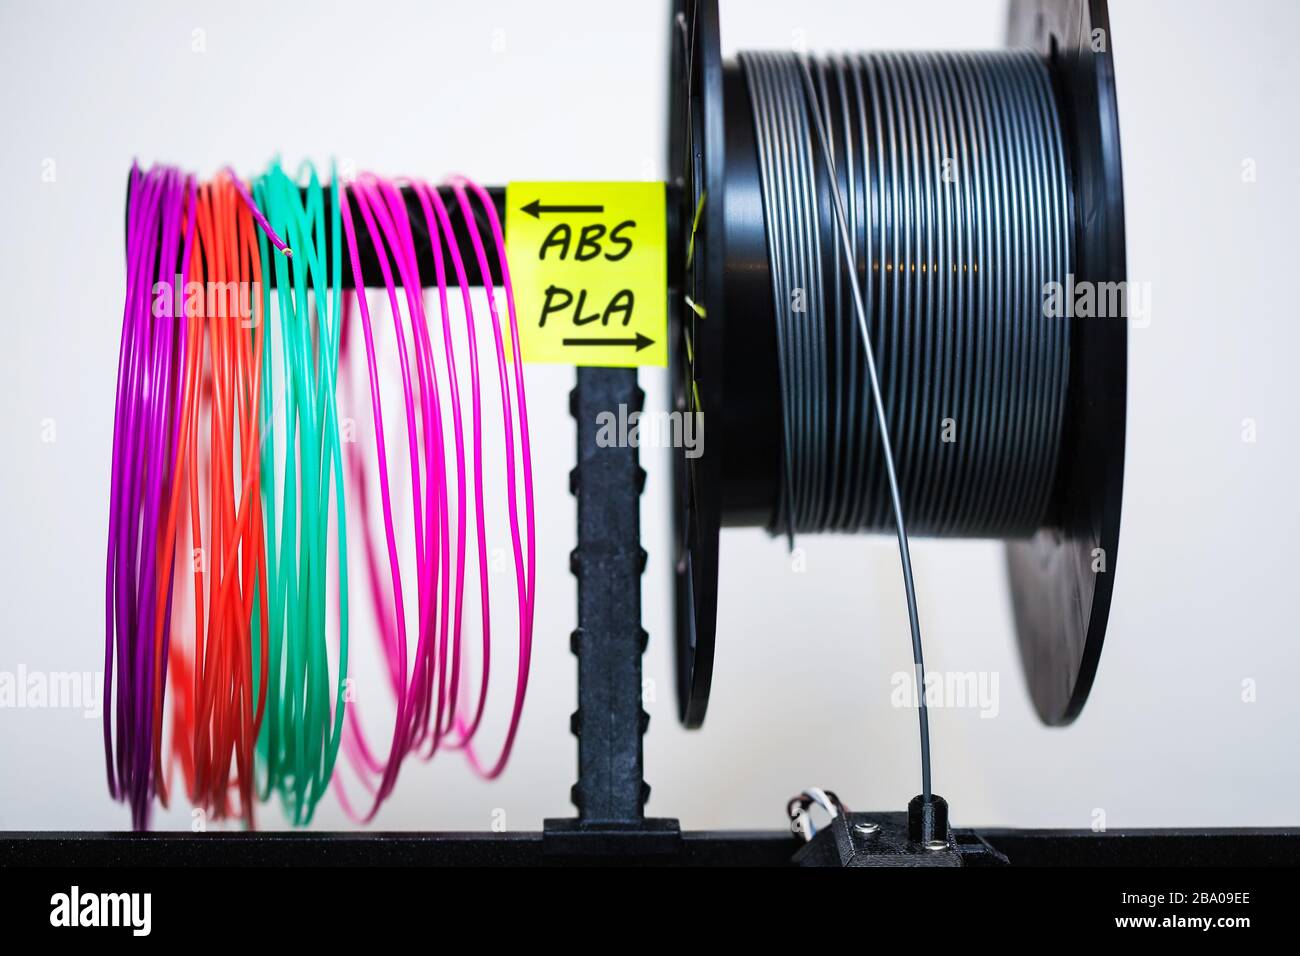 Loaded plastic filament on extruder with a sticky note that labels the variety of plastics used in 3d printing. Stock Photo